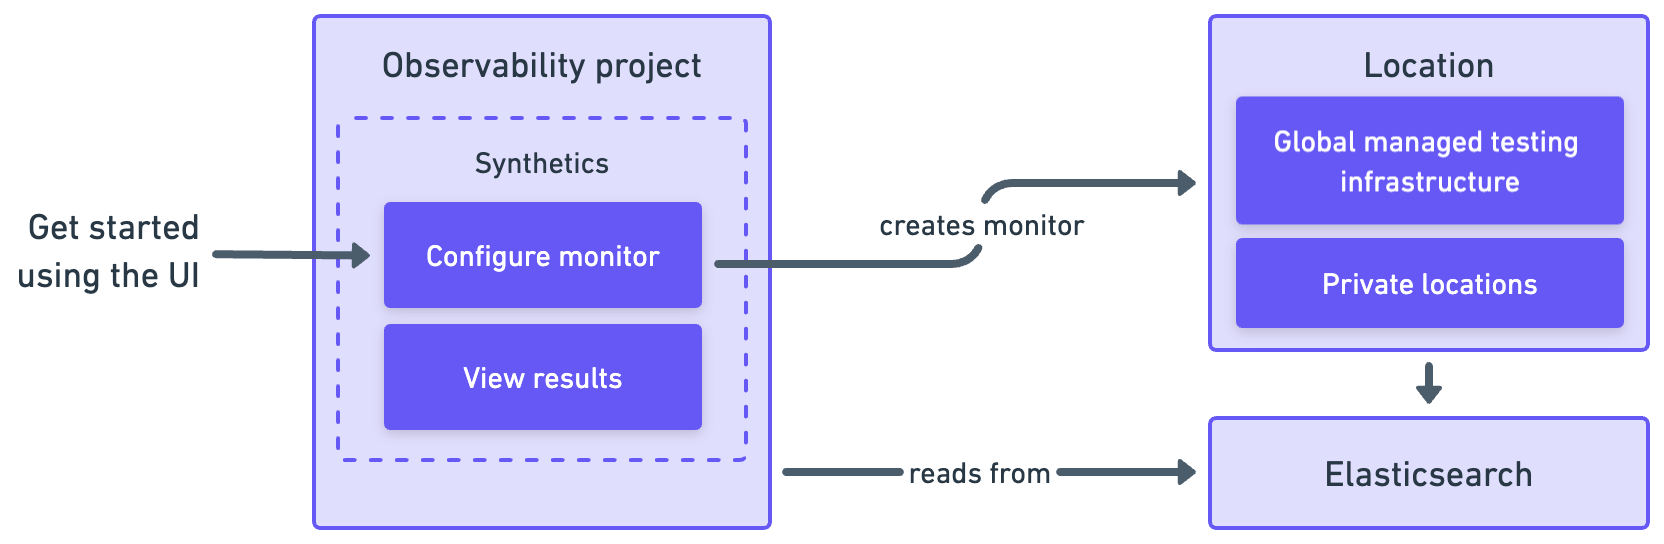 Diagram showing which pieces of software are used to configure monitors, create monitors, and view results when using the Synthetics UI.